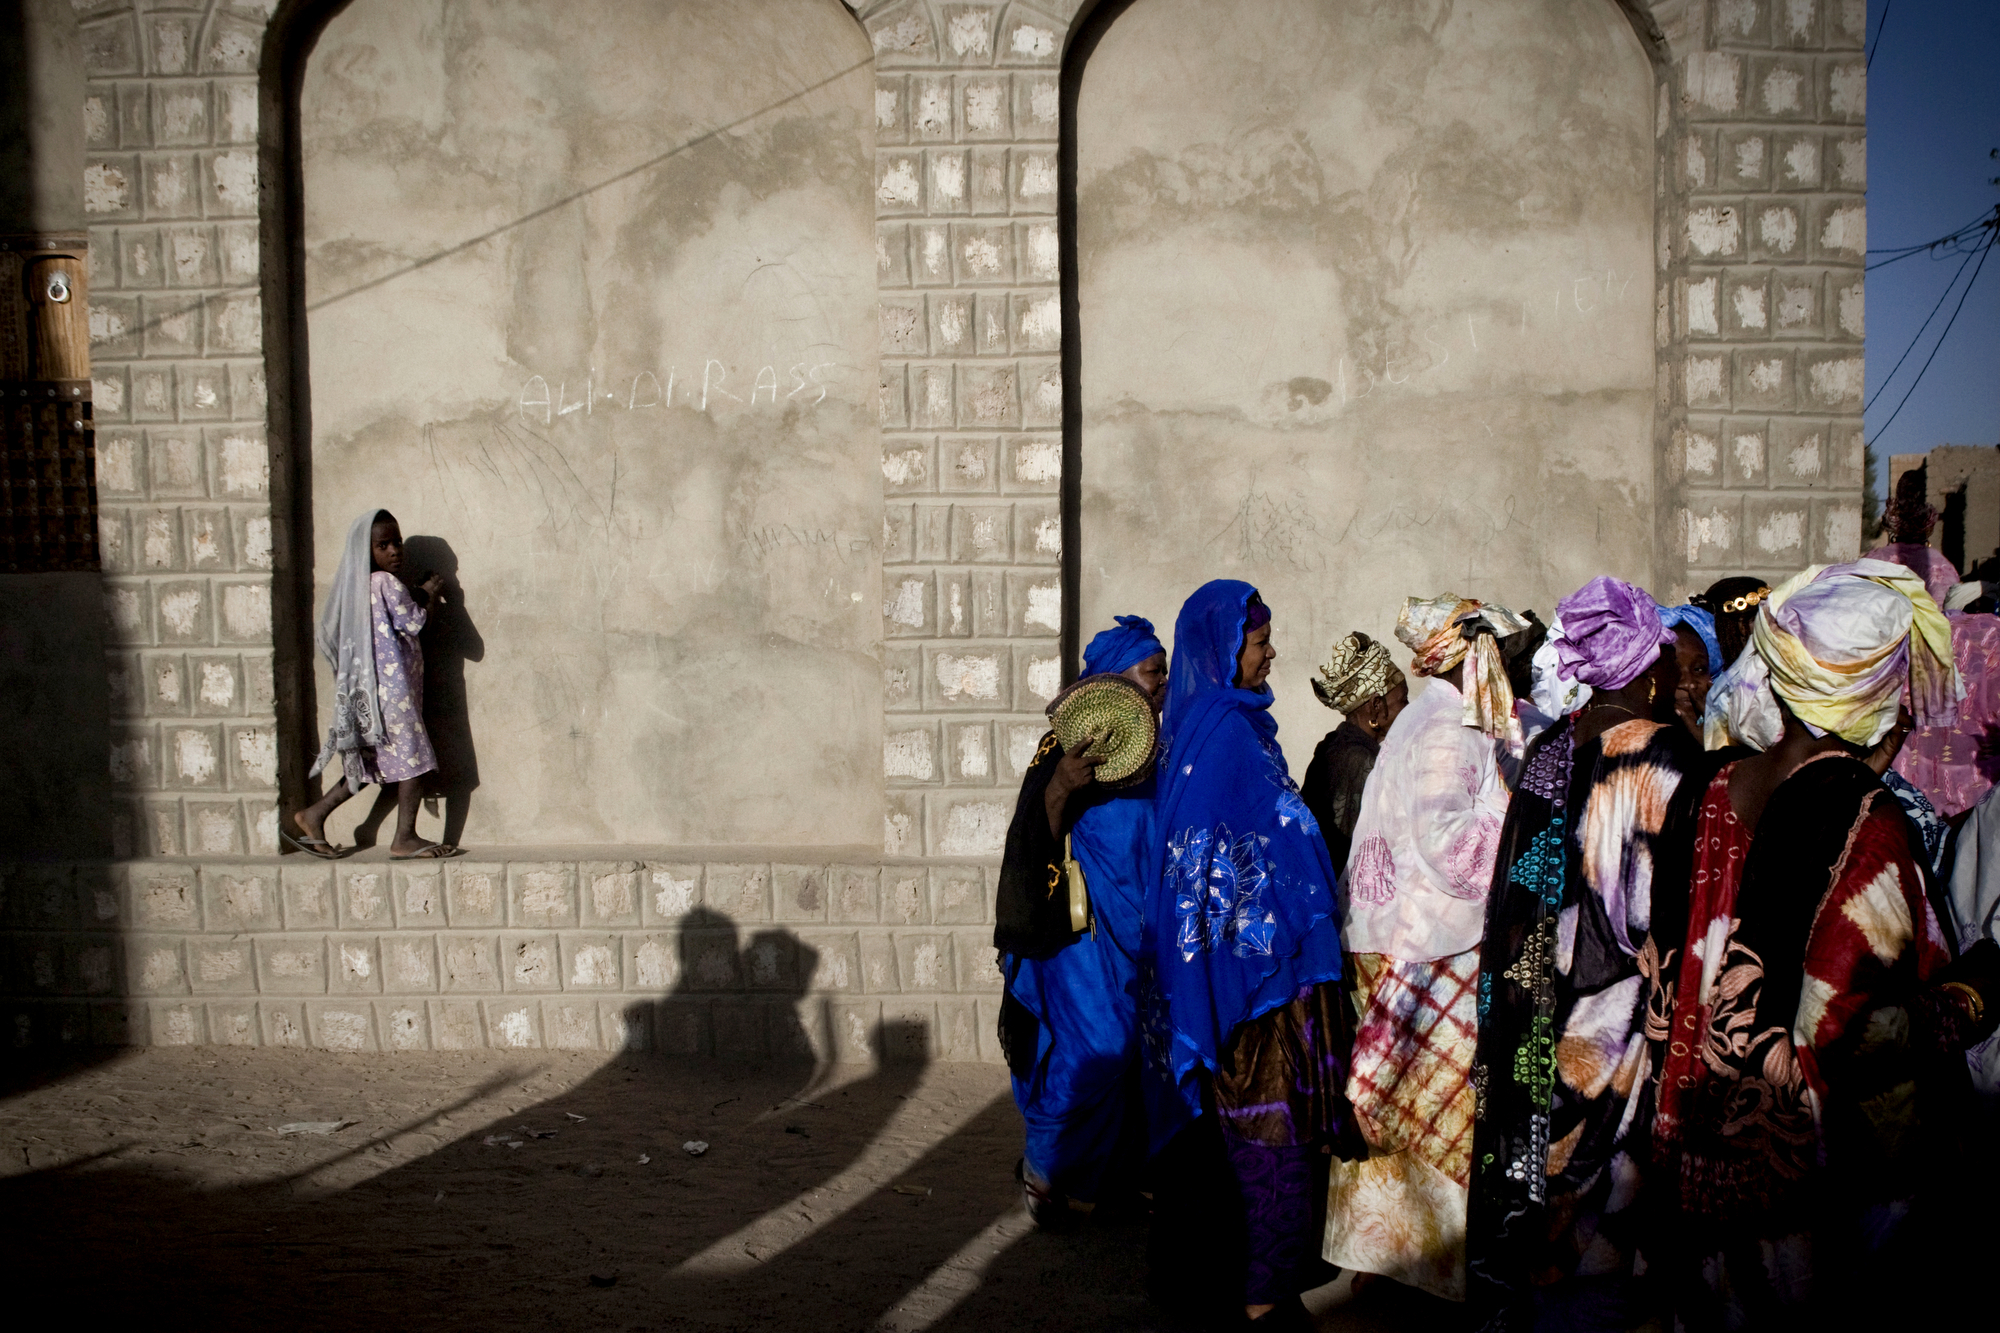  Women gather in the streets of Timbuktu, Mali on a Sunday afternoon to celebrate a three day wedding. by Katie Orlinsky. 